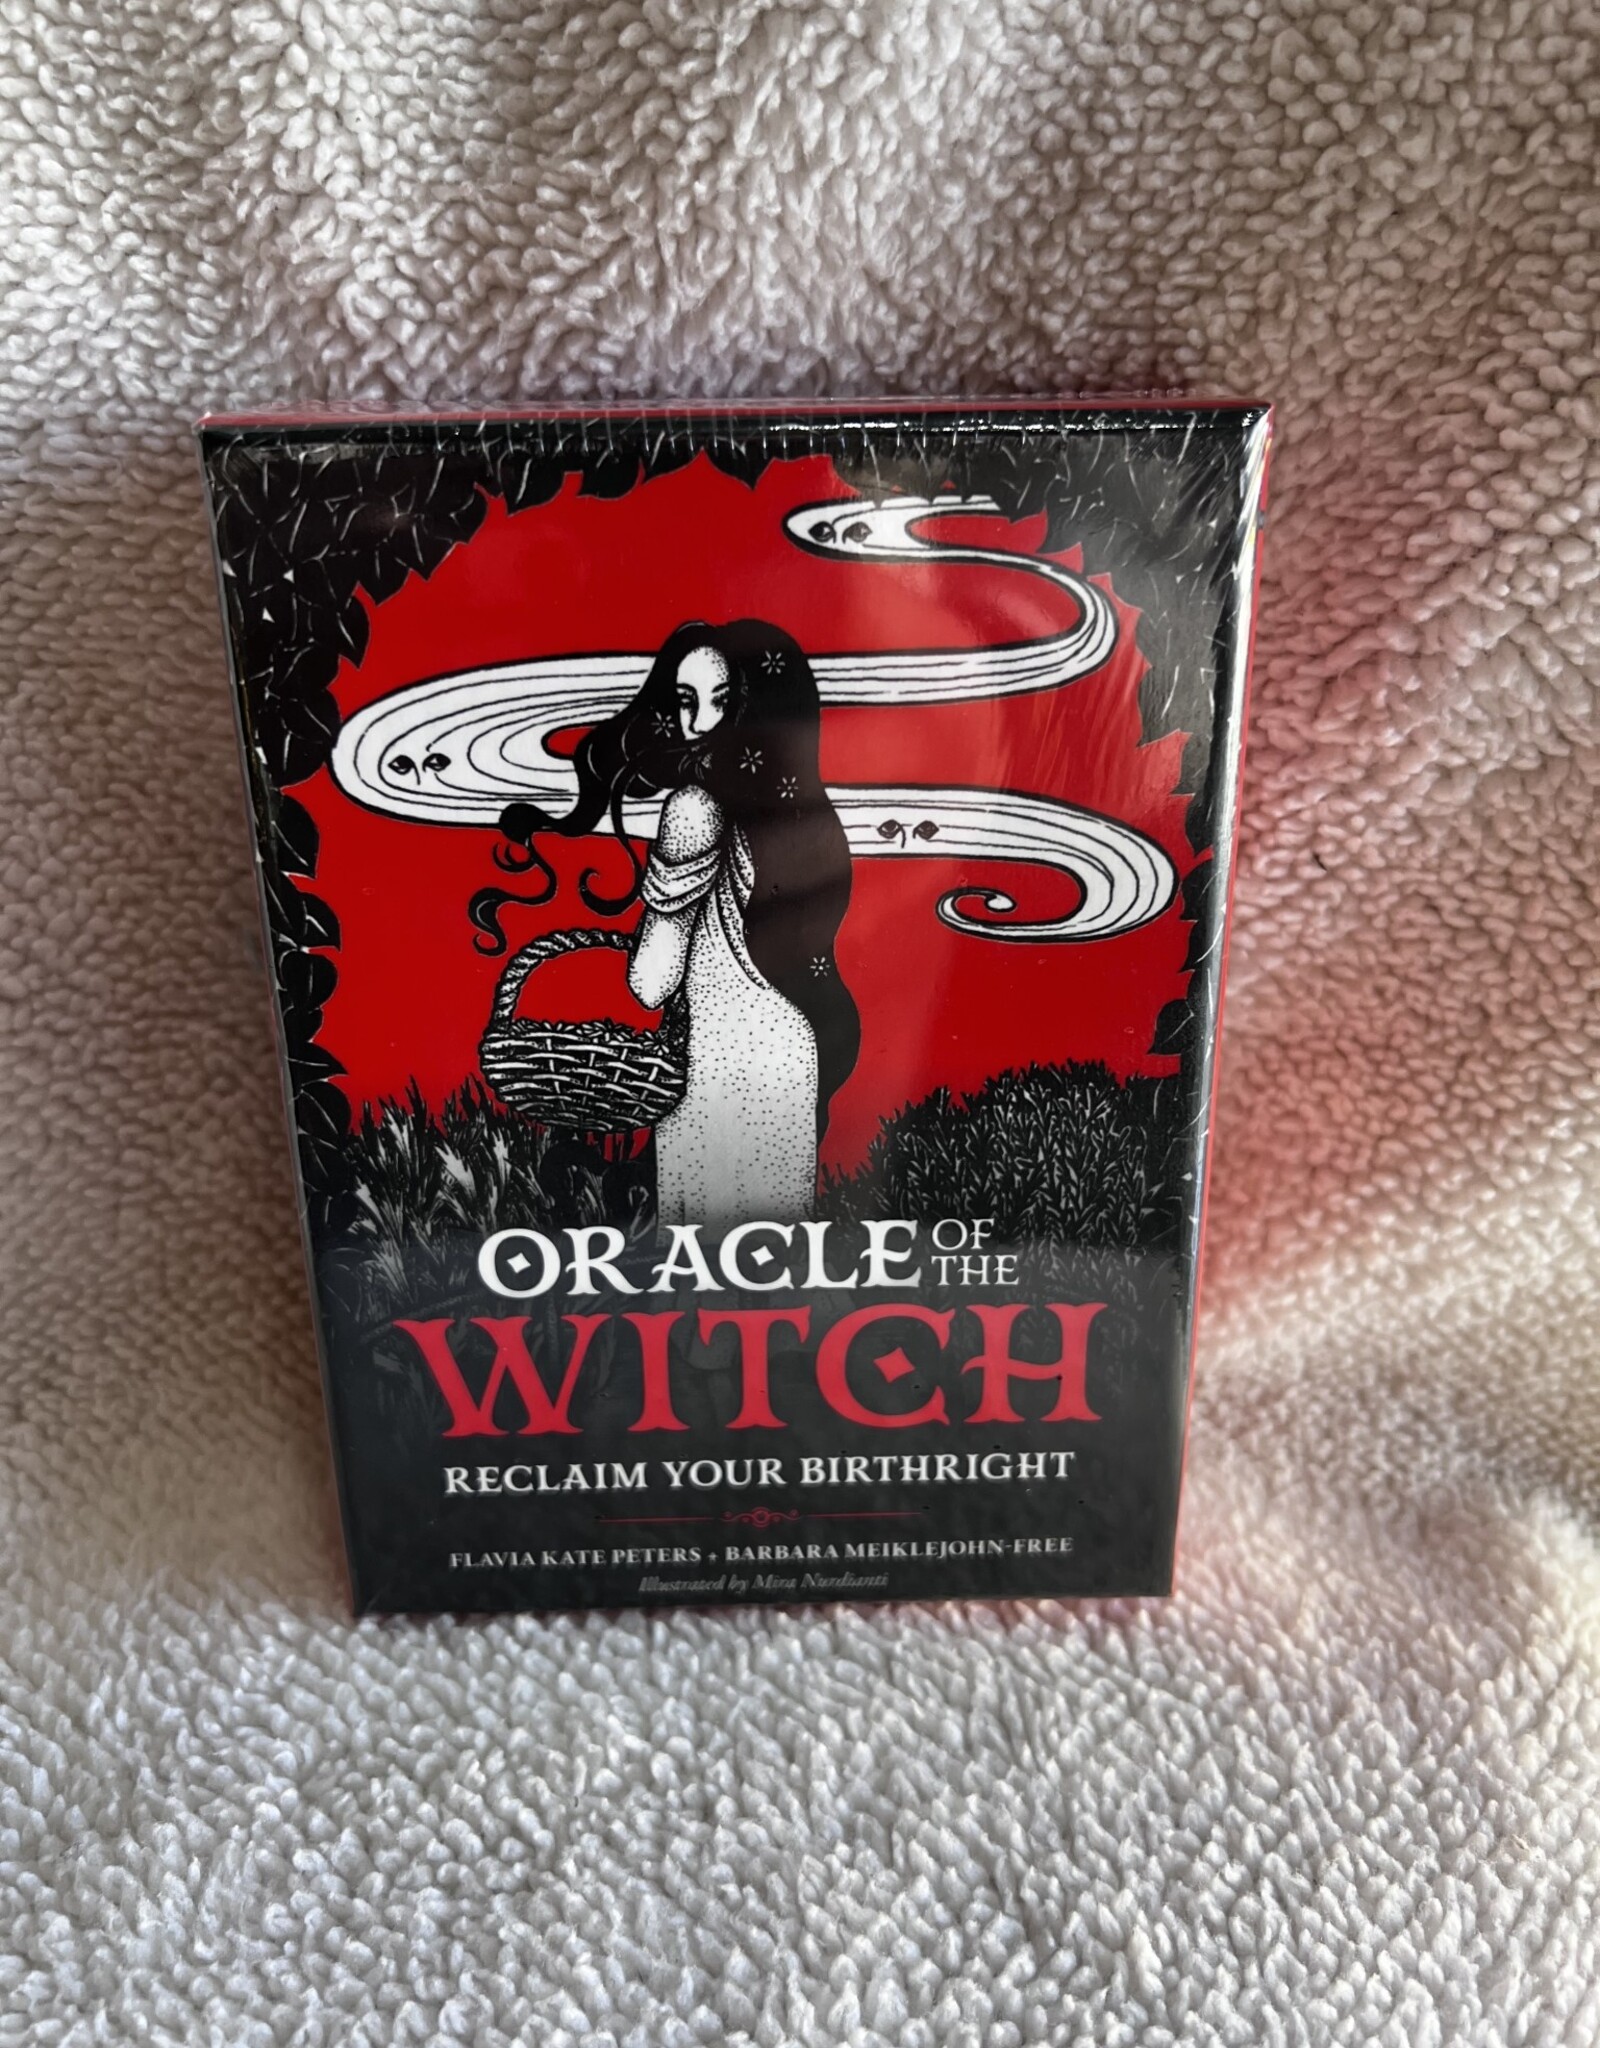 Oracle of the Witch